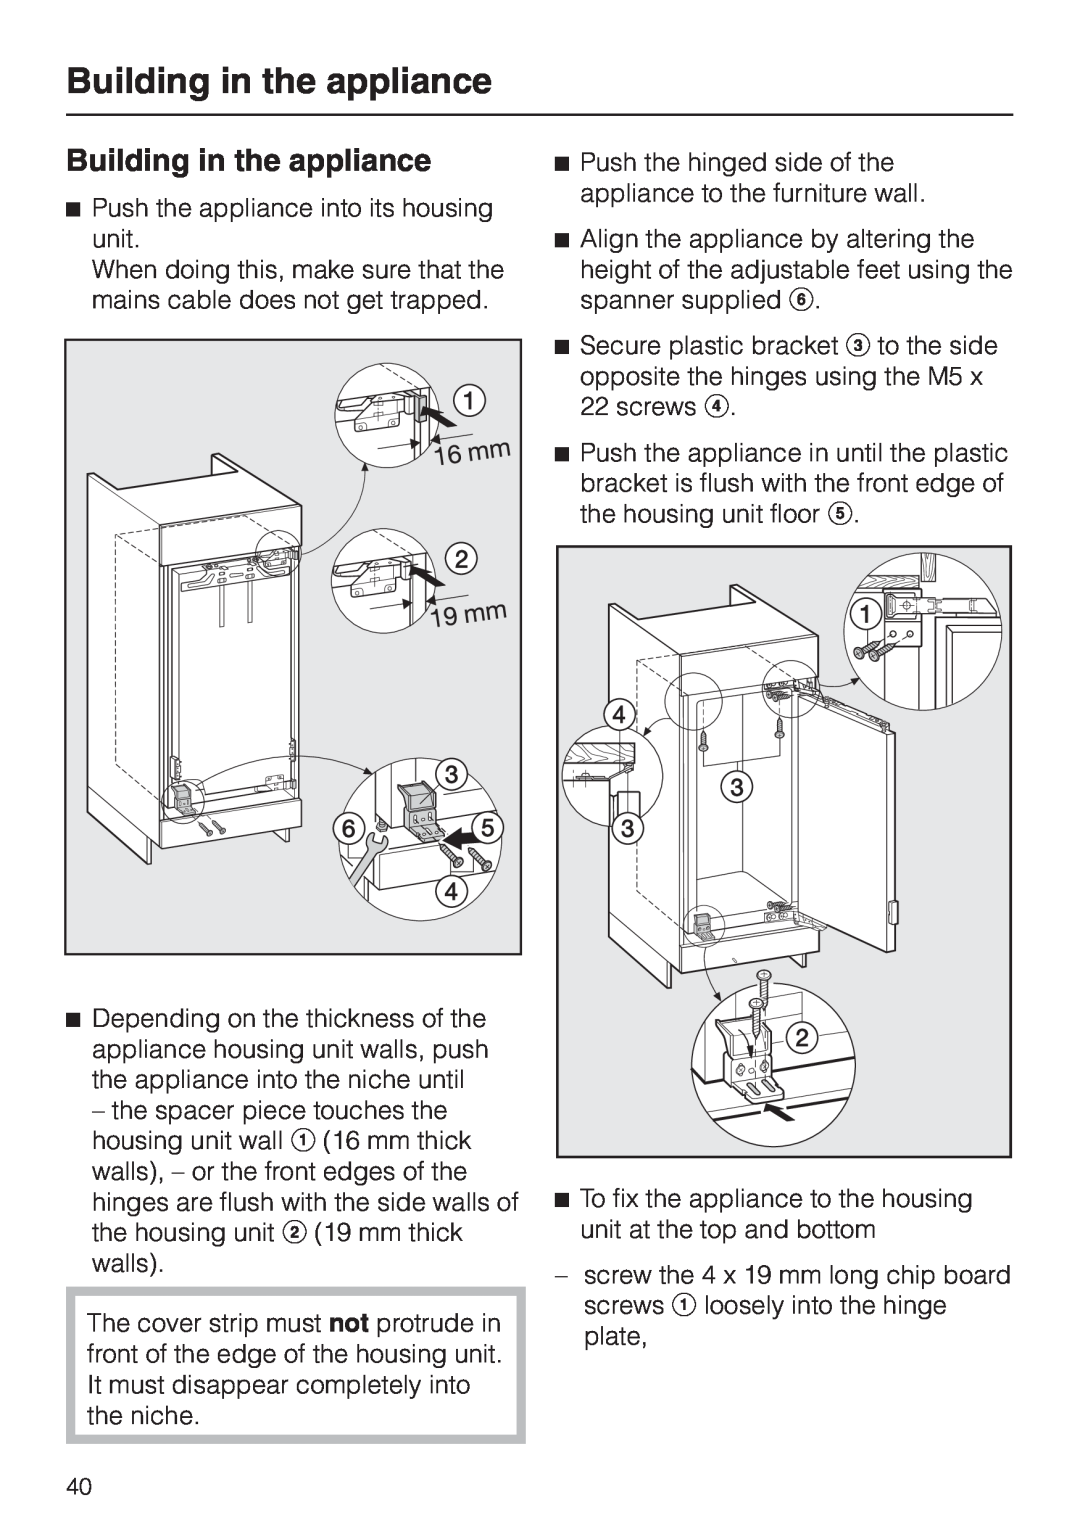 Miele F 456 i-3 installation instructions Building in the appliance 